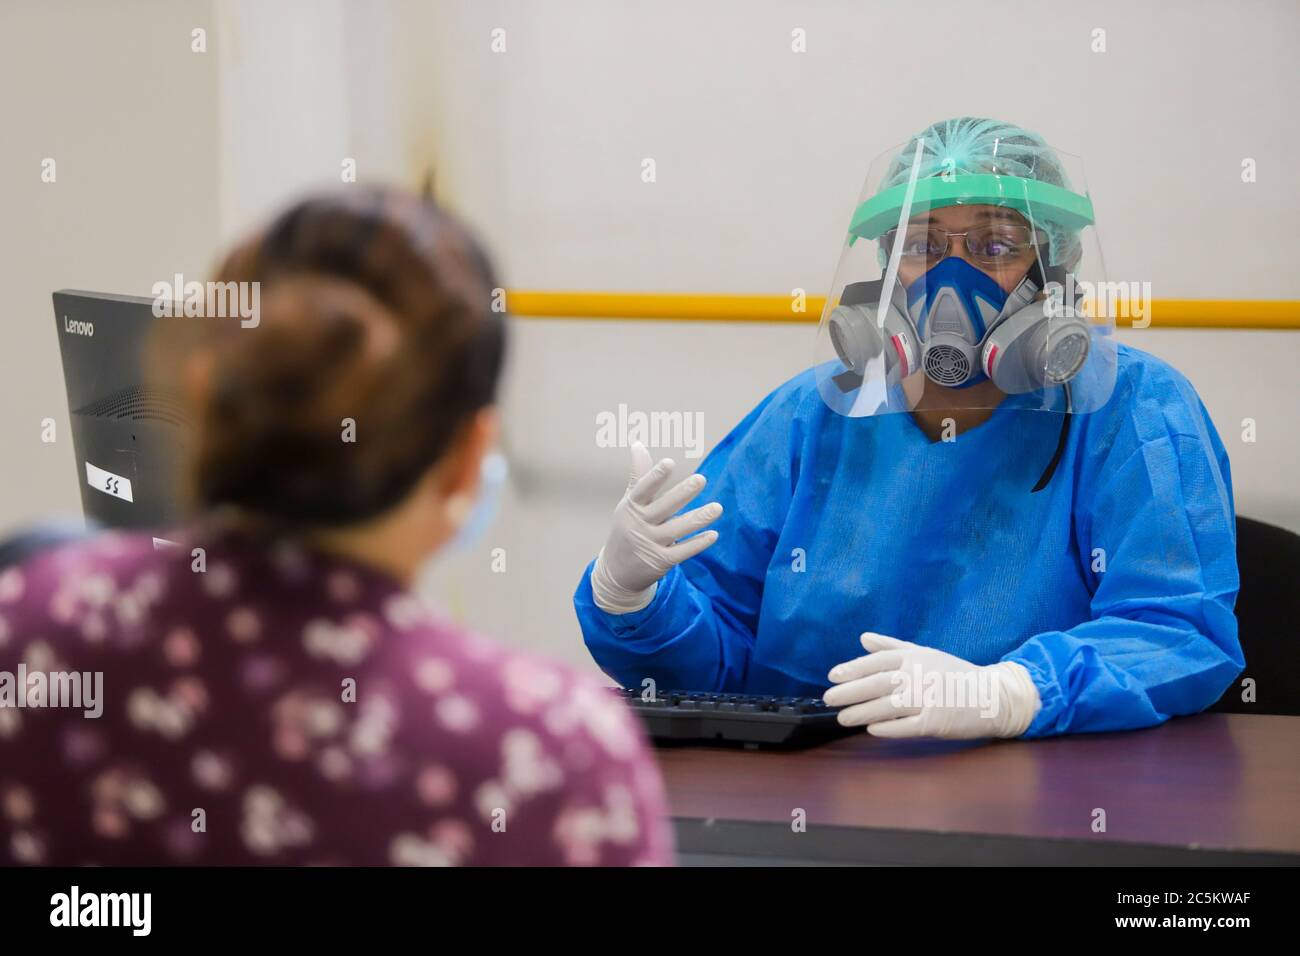 HERMOSILLO, MEXICO - JULY 3:A woman is attended by health personnel who perform a rapid Covid-19 detection test during a health day held at the Sonora Arena on July 3, 2020 in Hermosillo, Mexico. (Luis Gutierrez/Norte Photo/) Stock Photo